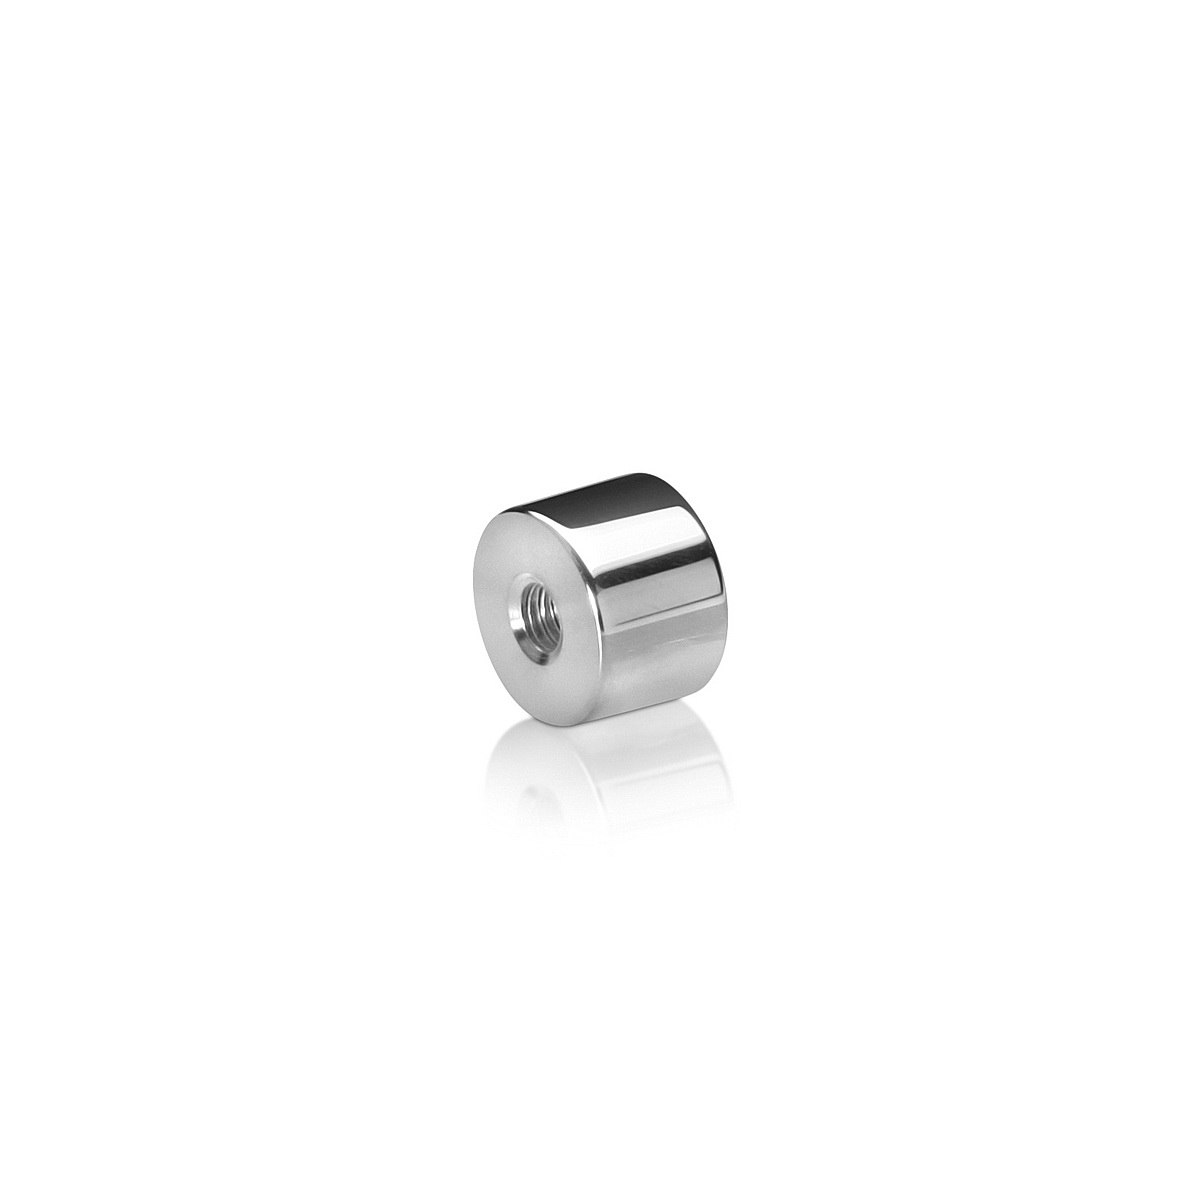 10-24 Threaded Barrels Diameter: 3/4'', Length: 1/2'', Polished Finish Grade 304 [Required Material Hole Size: 7/32'']